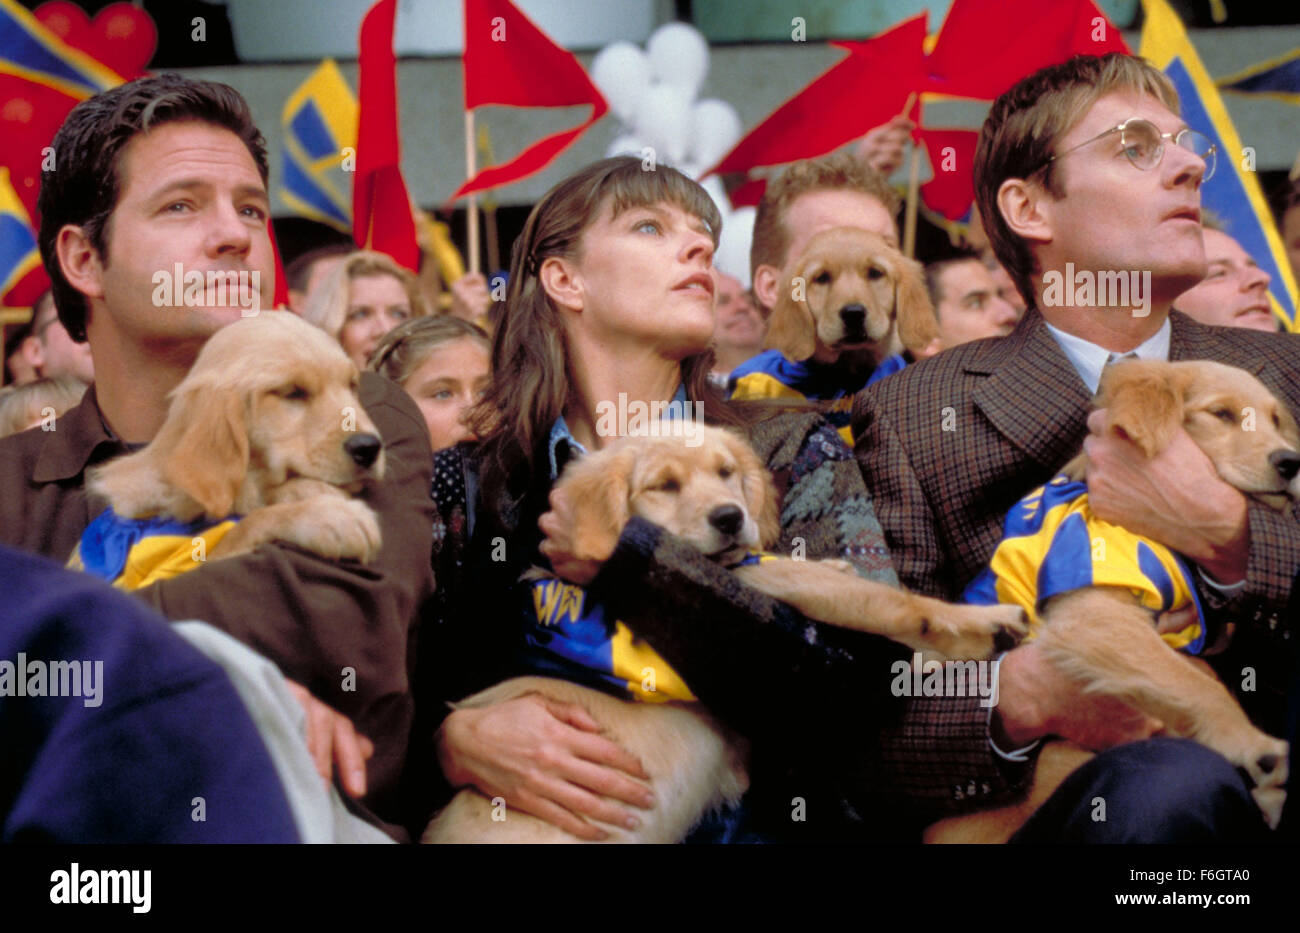 Jun 29 2001 Vancouver Bc Canada A Scene From The Movie Starring Stock Photo Alamy How does buddies canada hold up as an online cannabis dispensary in canada? https www alamy com stock photo jun 29 2001 vancouver bc canada a scene from the movie starring buddy 90110104 html